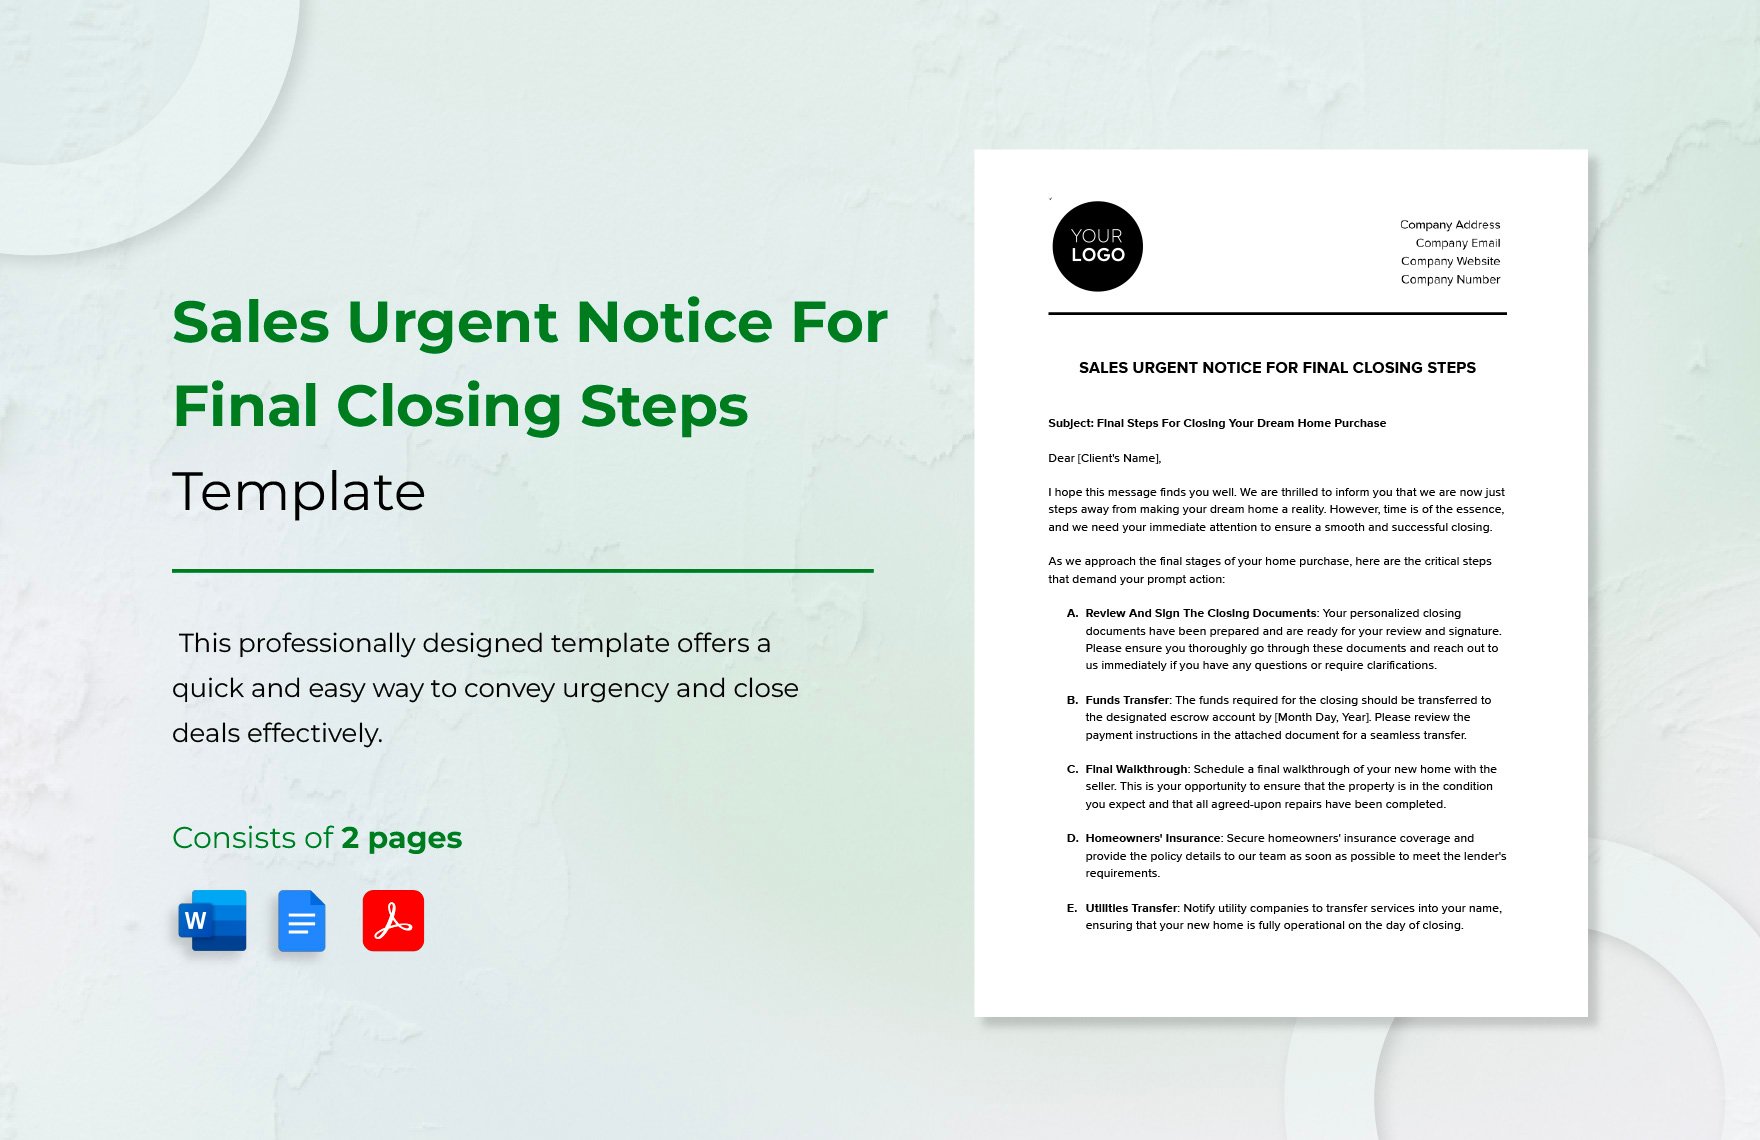 Sales Urgent Notice for Final Closing Steps Template